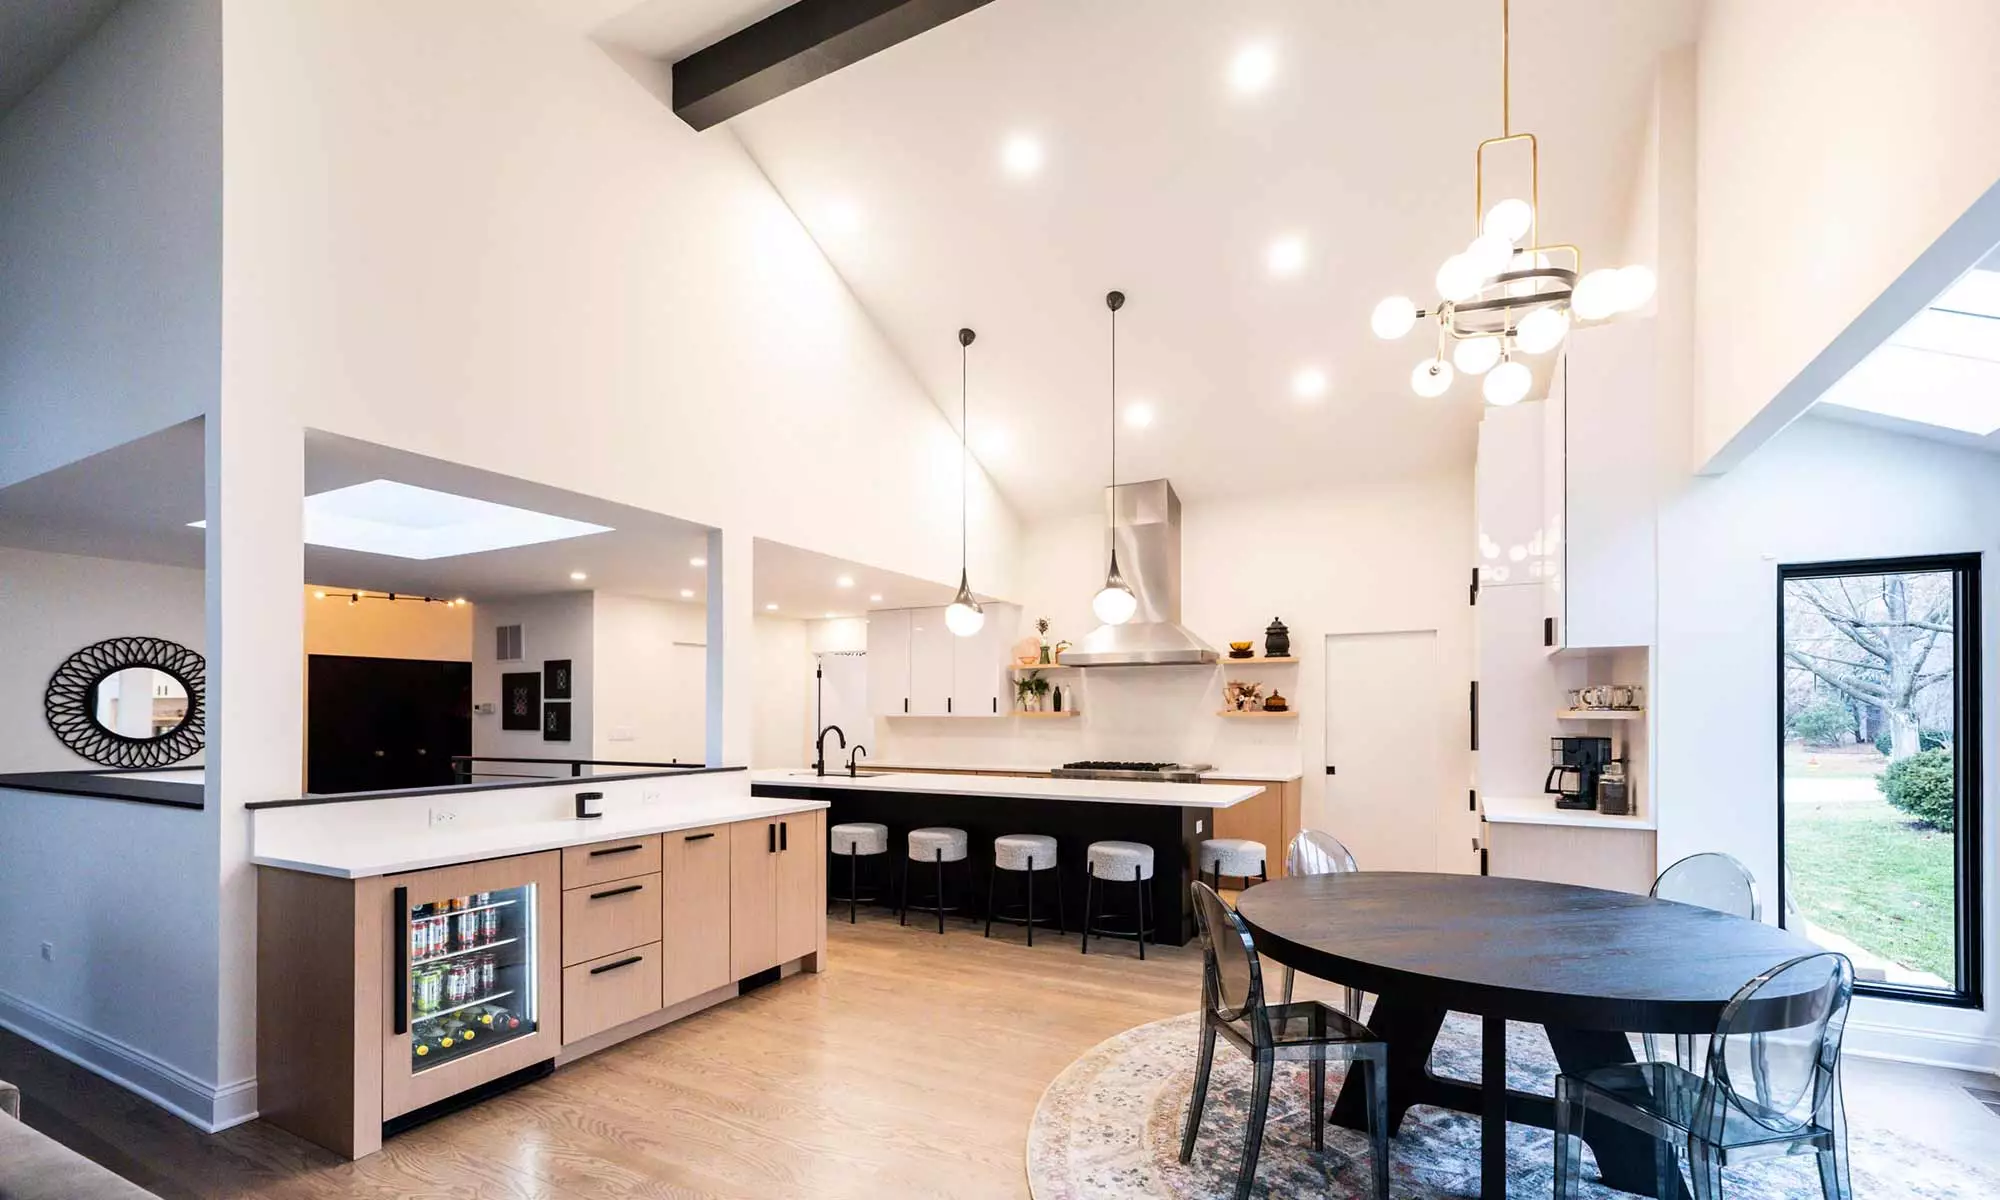 Indian Head Park luxury kithcen remodel by LivCo featuring wood, black, and gloss white modern cabinetry with view of breakfast room and built-in bar cabinetry